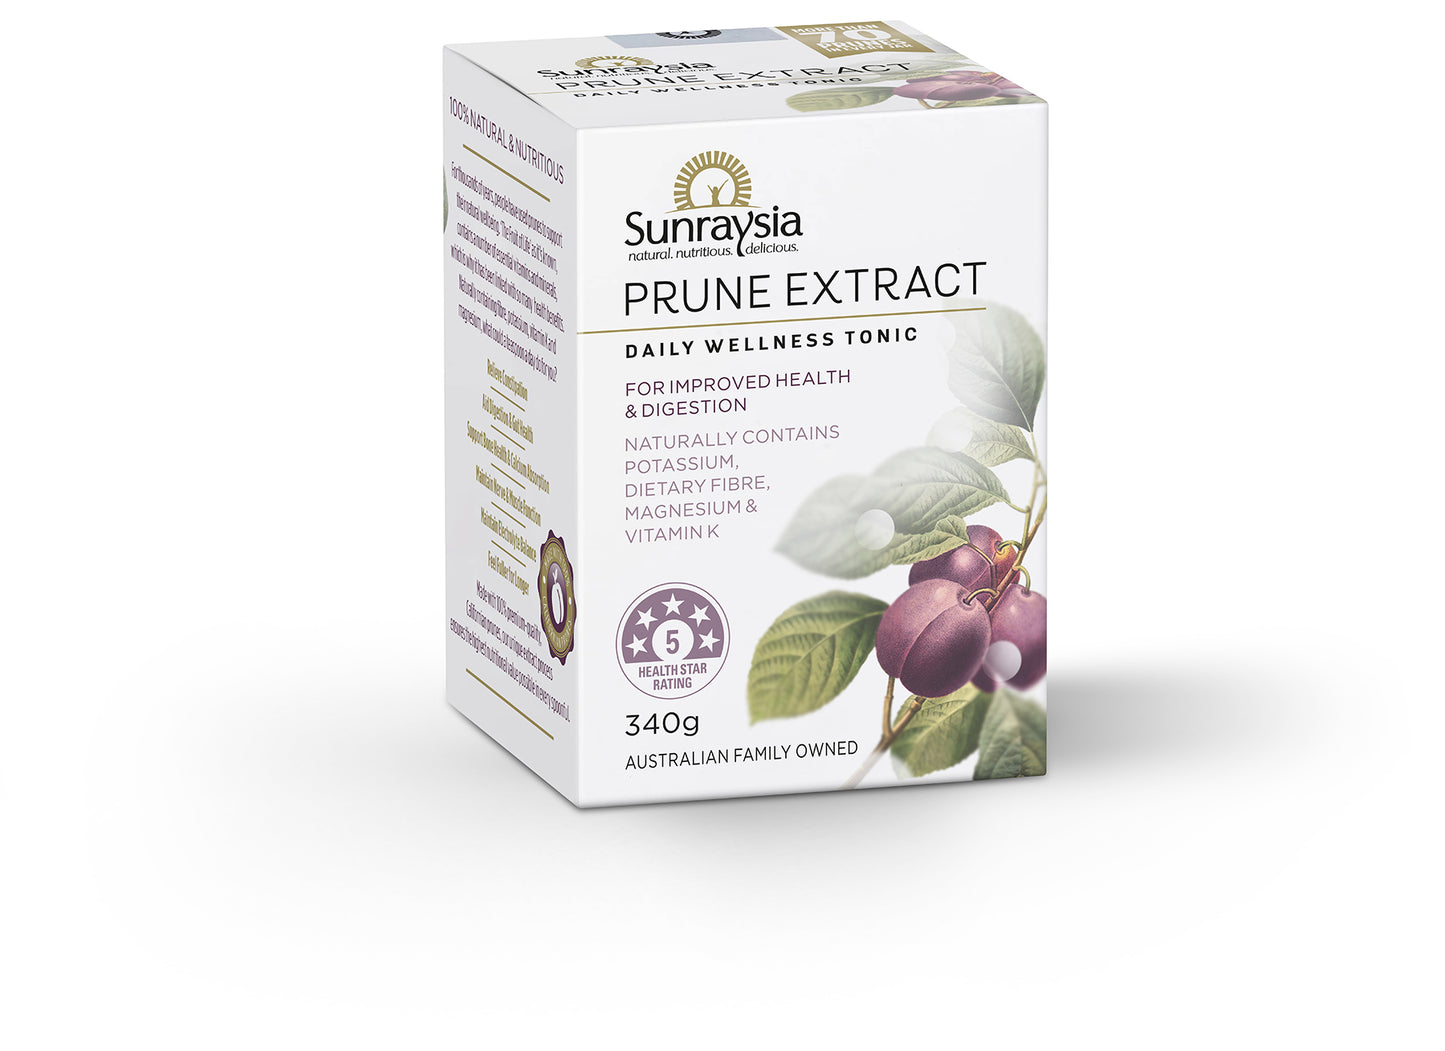 Sunraysia Prune Extract (Super Value 4 Pack)